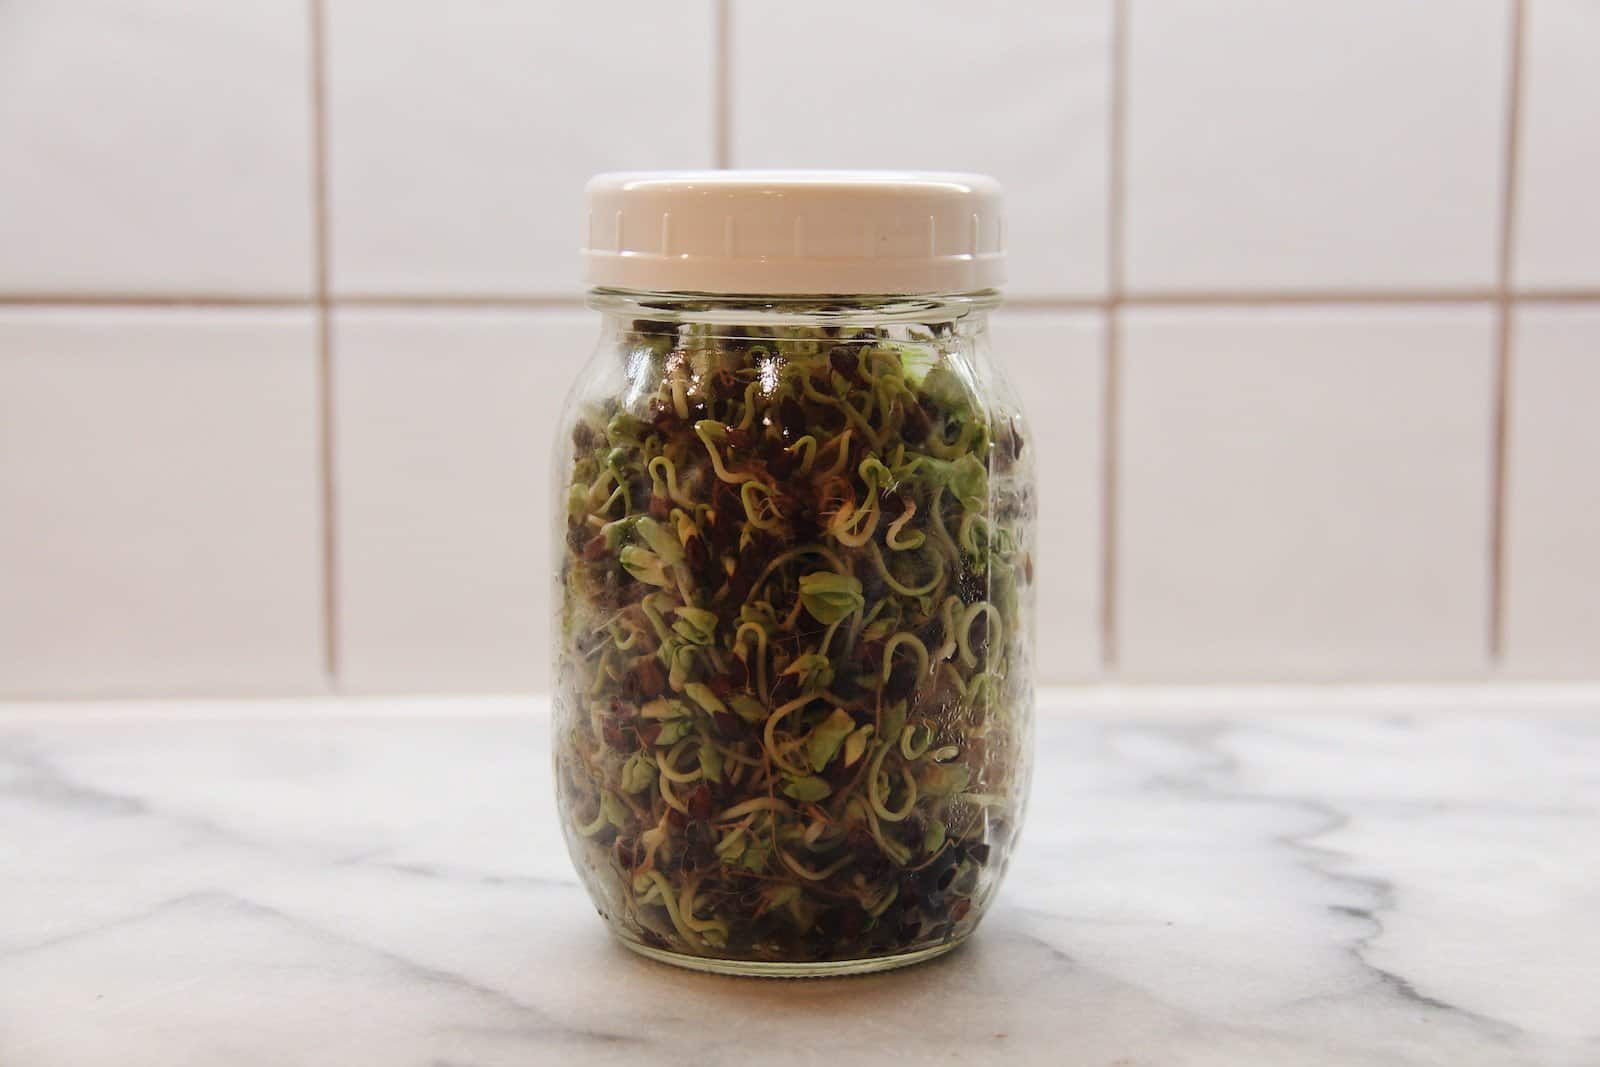 Growing Sprouts - Sprouting Seeds in Mason Jar